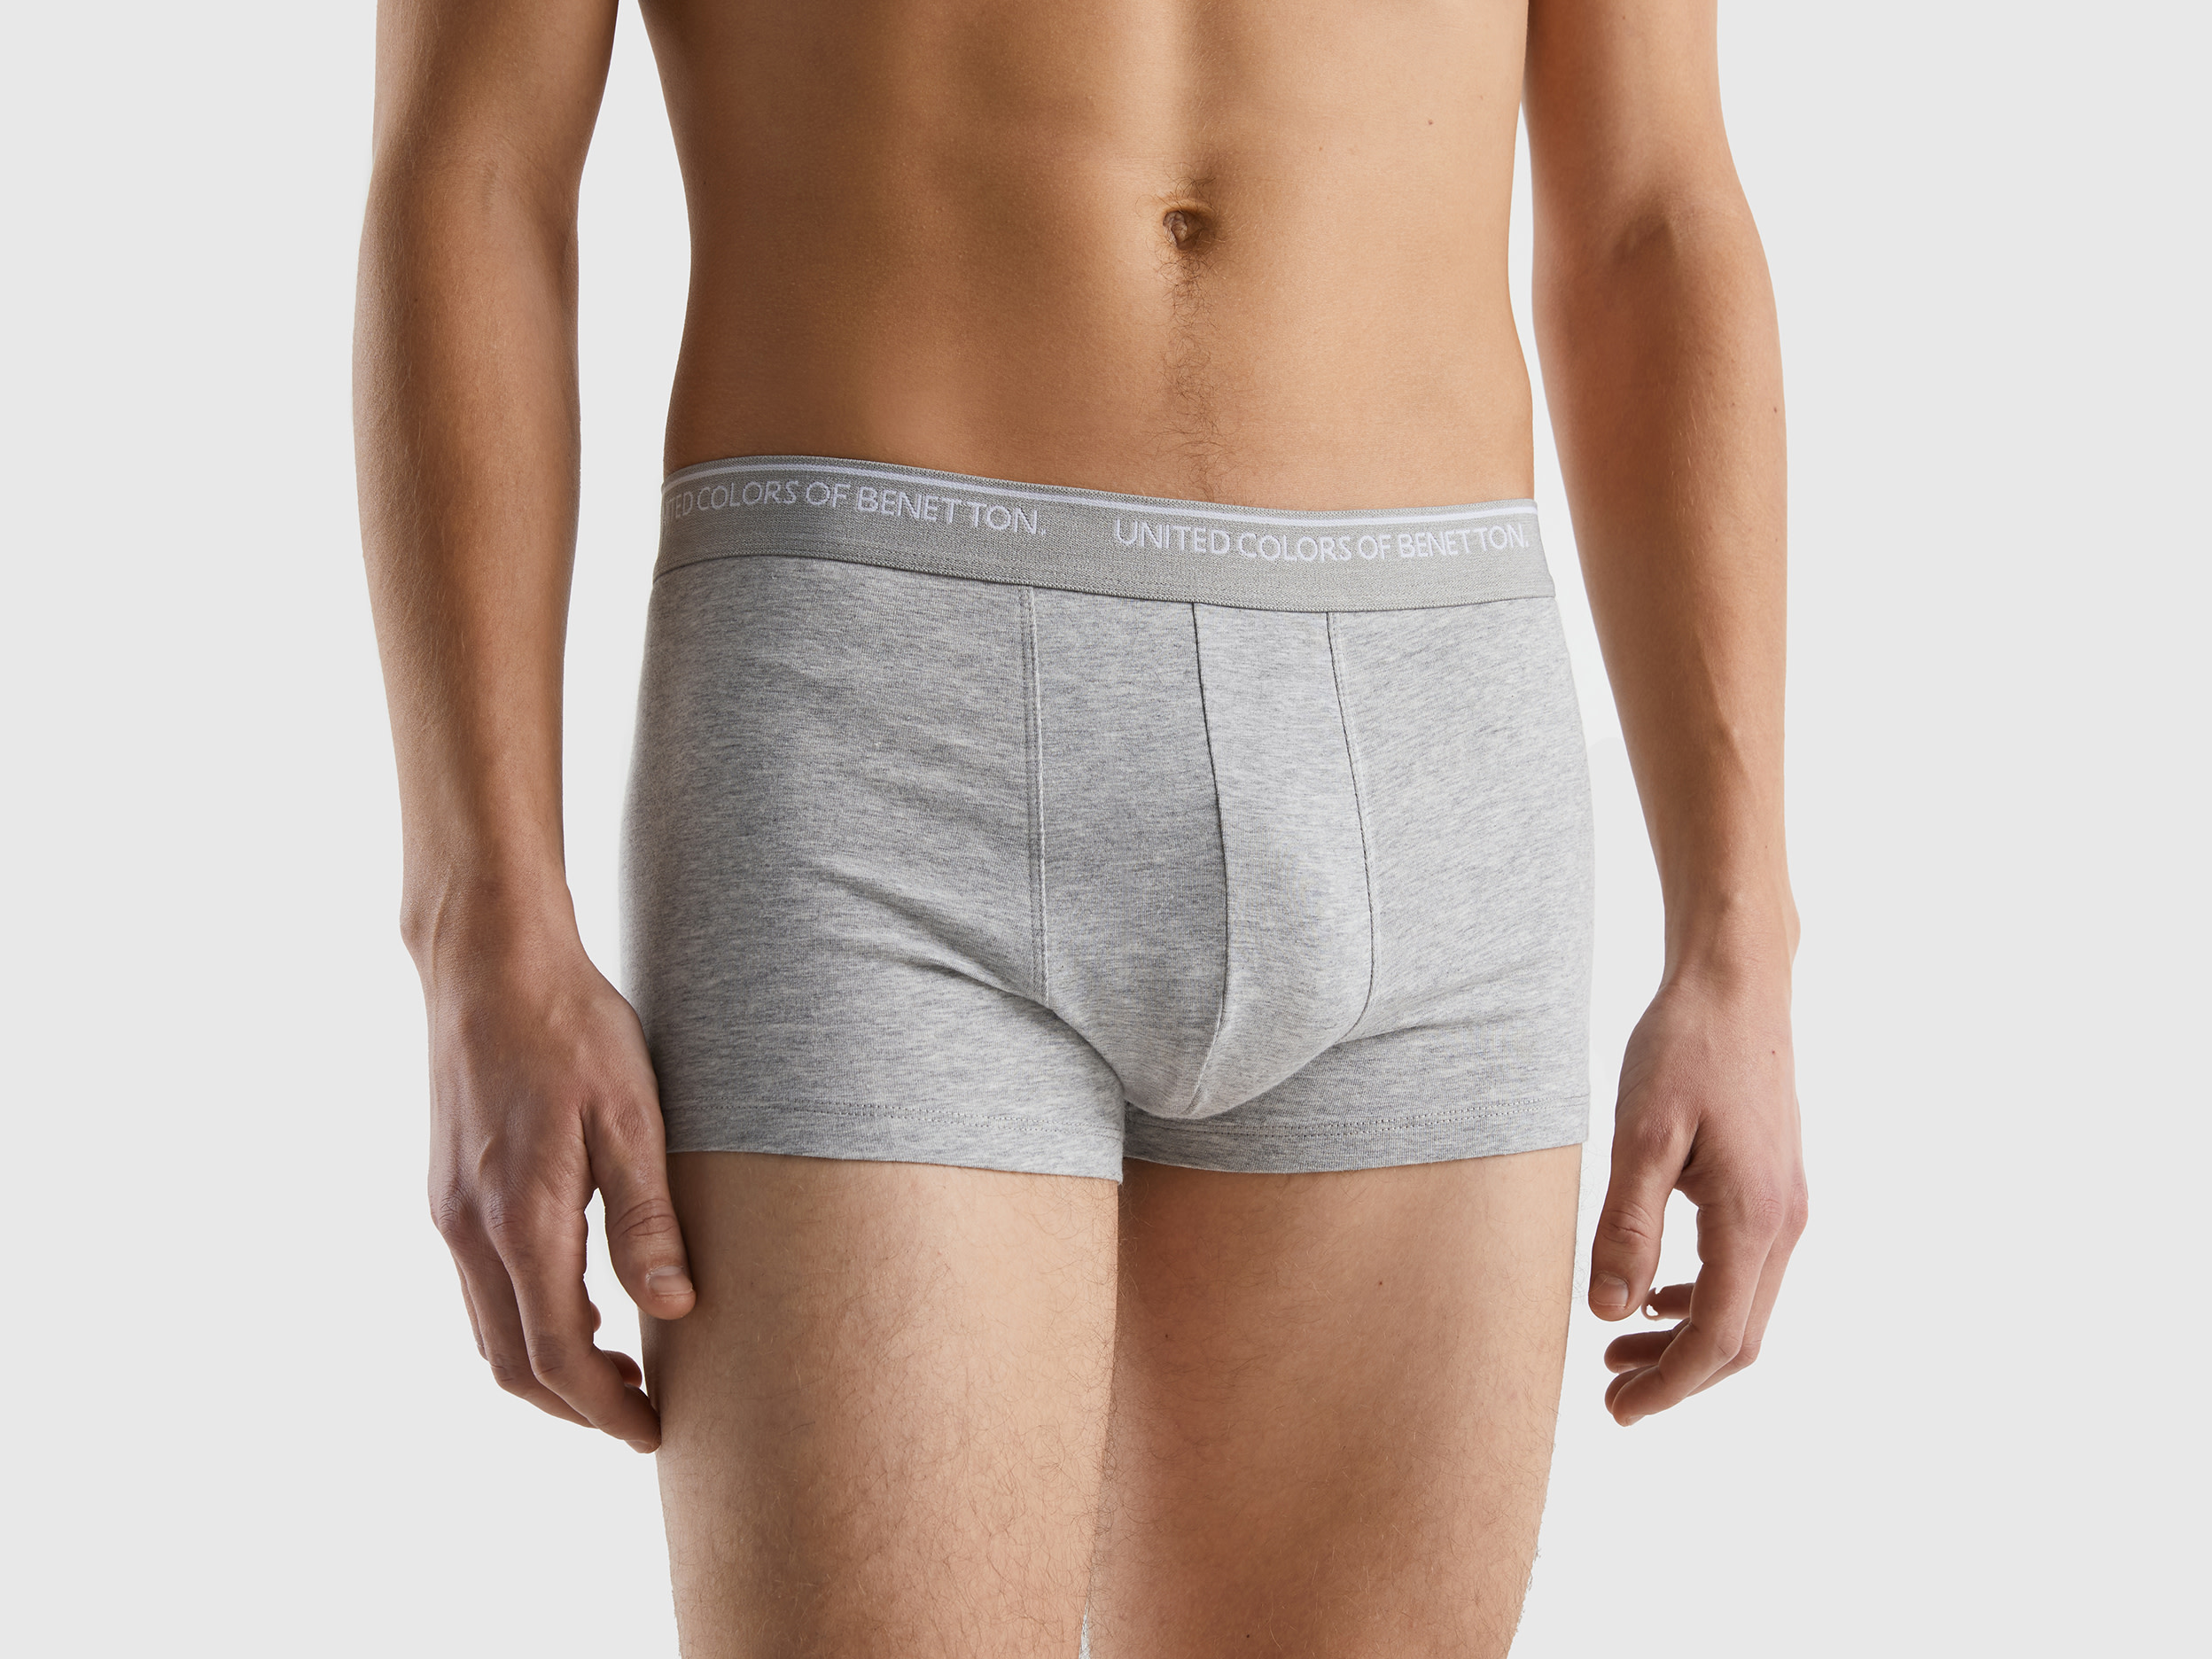 Benetton, Fitted Boxers In Organic Cotton, size L, Light Gray, Men